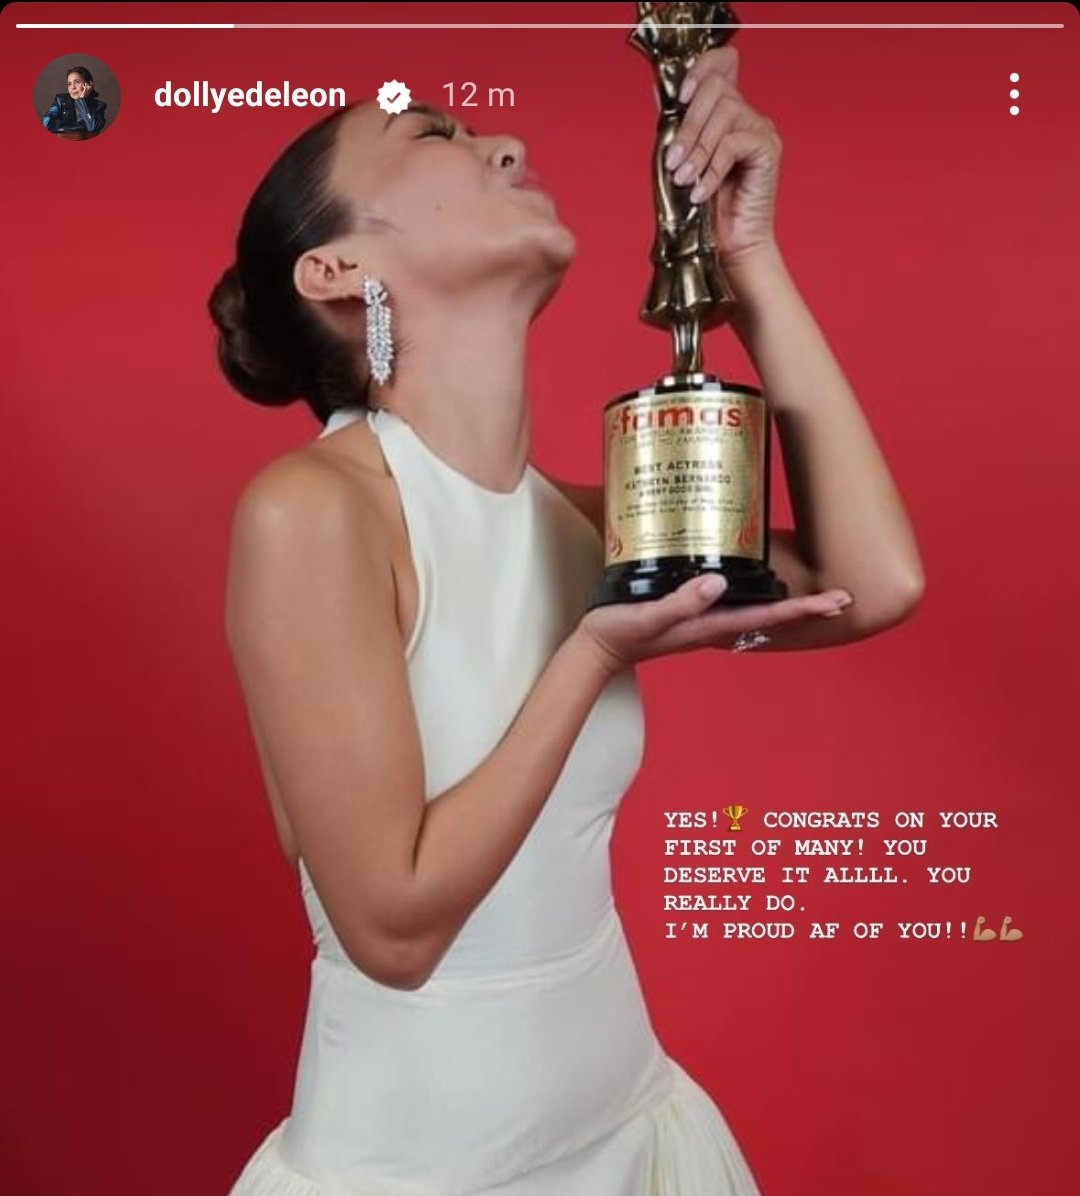 Ms. Dolly's message to Kath:

'Yes! 🏆 Congrats on your first of many! You deserve it all. You really do. I'm proud AF of you!' 

Awee. 💕🥹